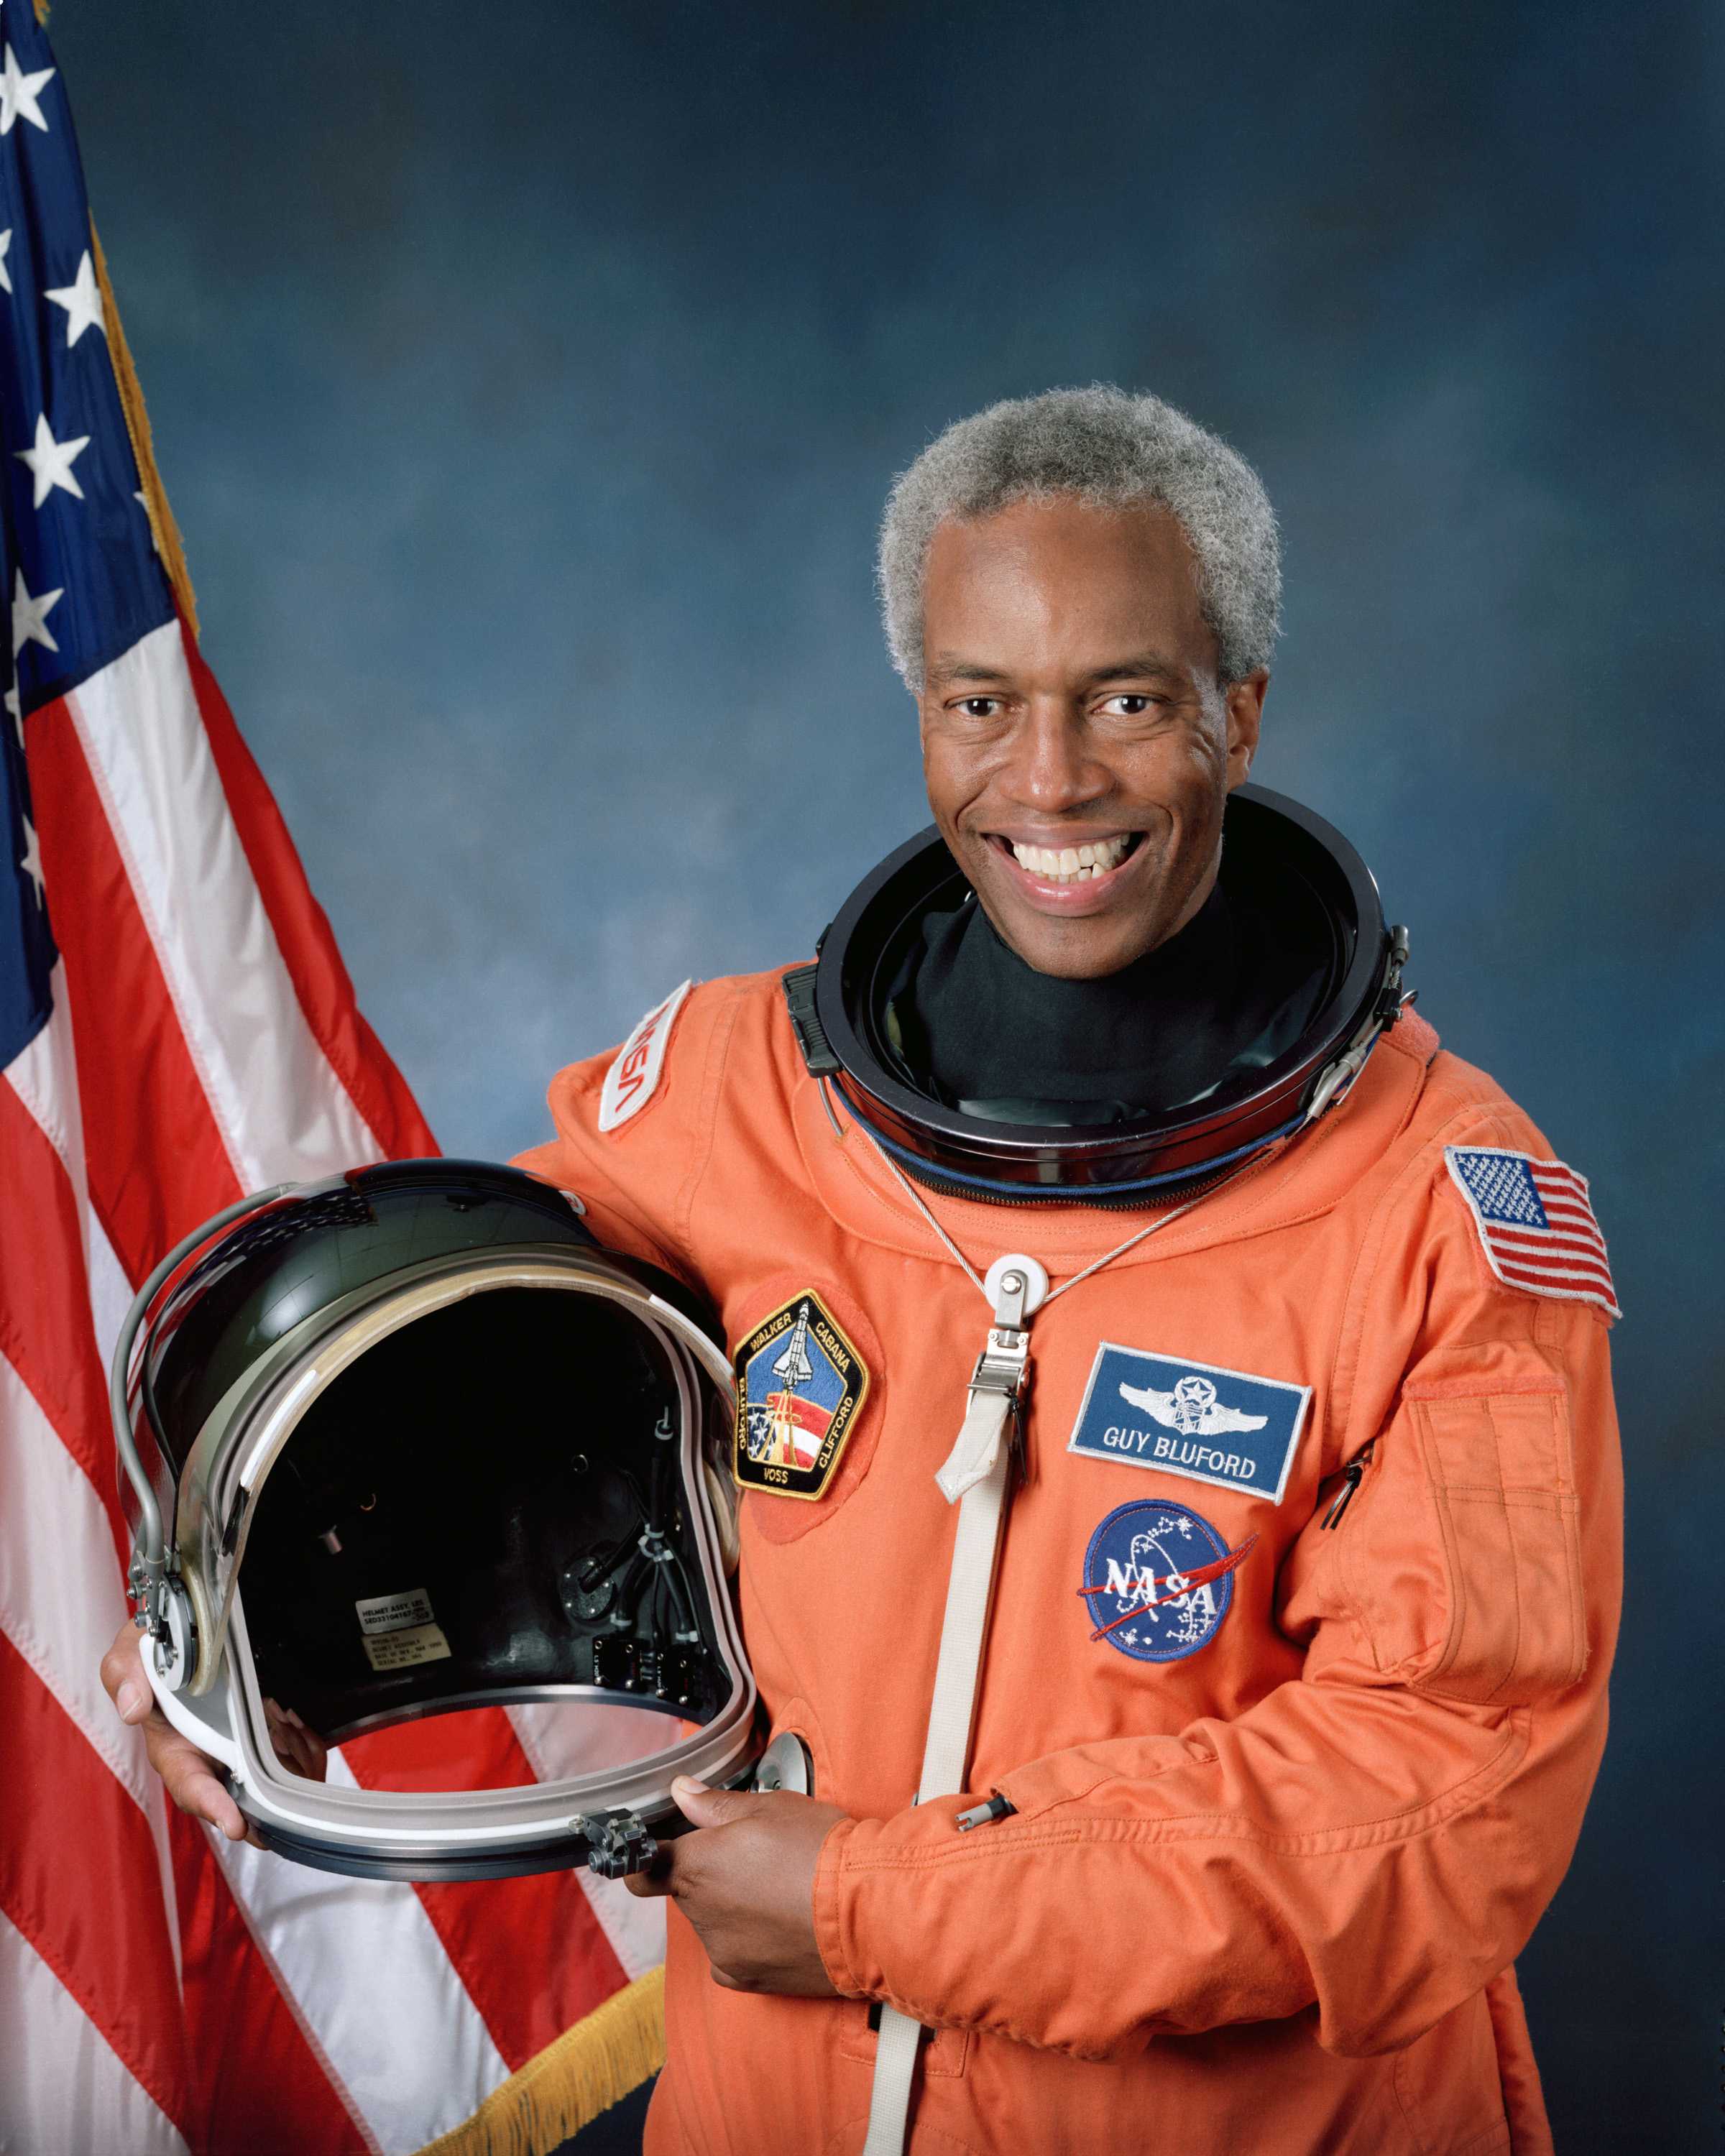 Guion Bluford poses for a portrait in an orange NASA space suit, holding a helmet, in front of a blue background.